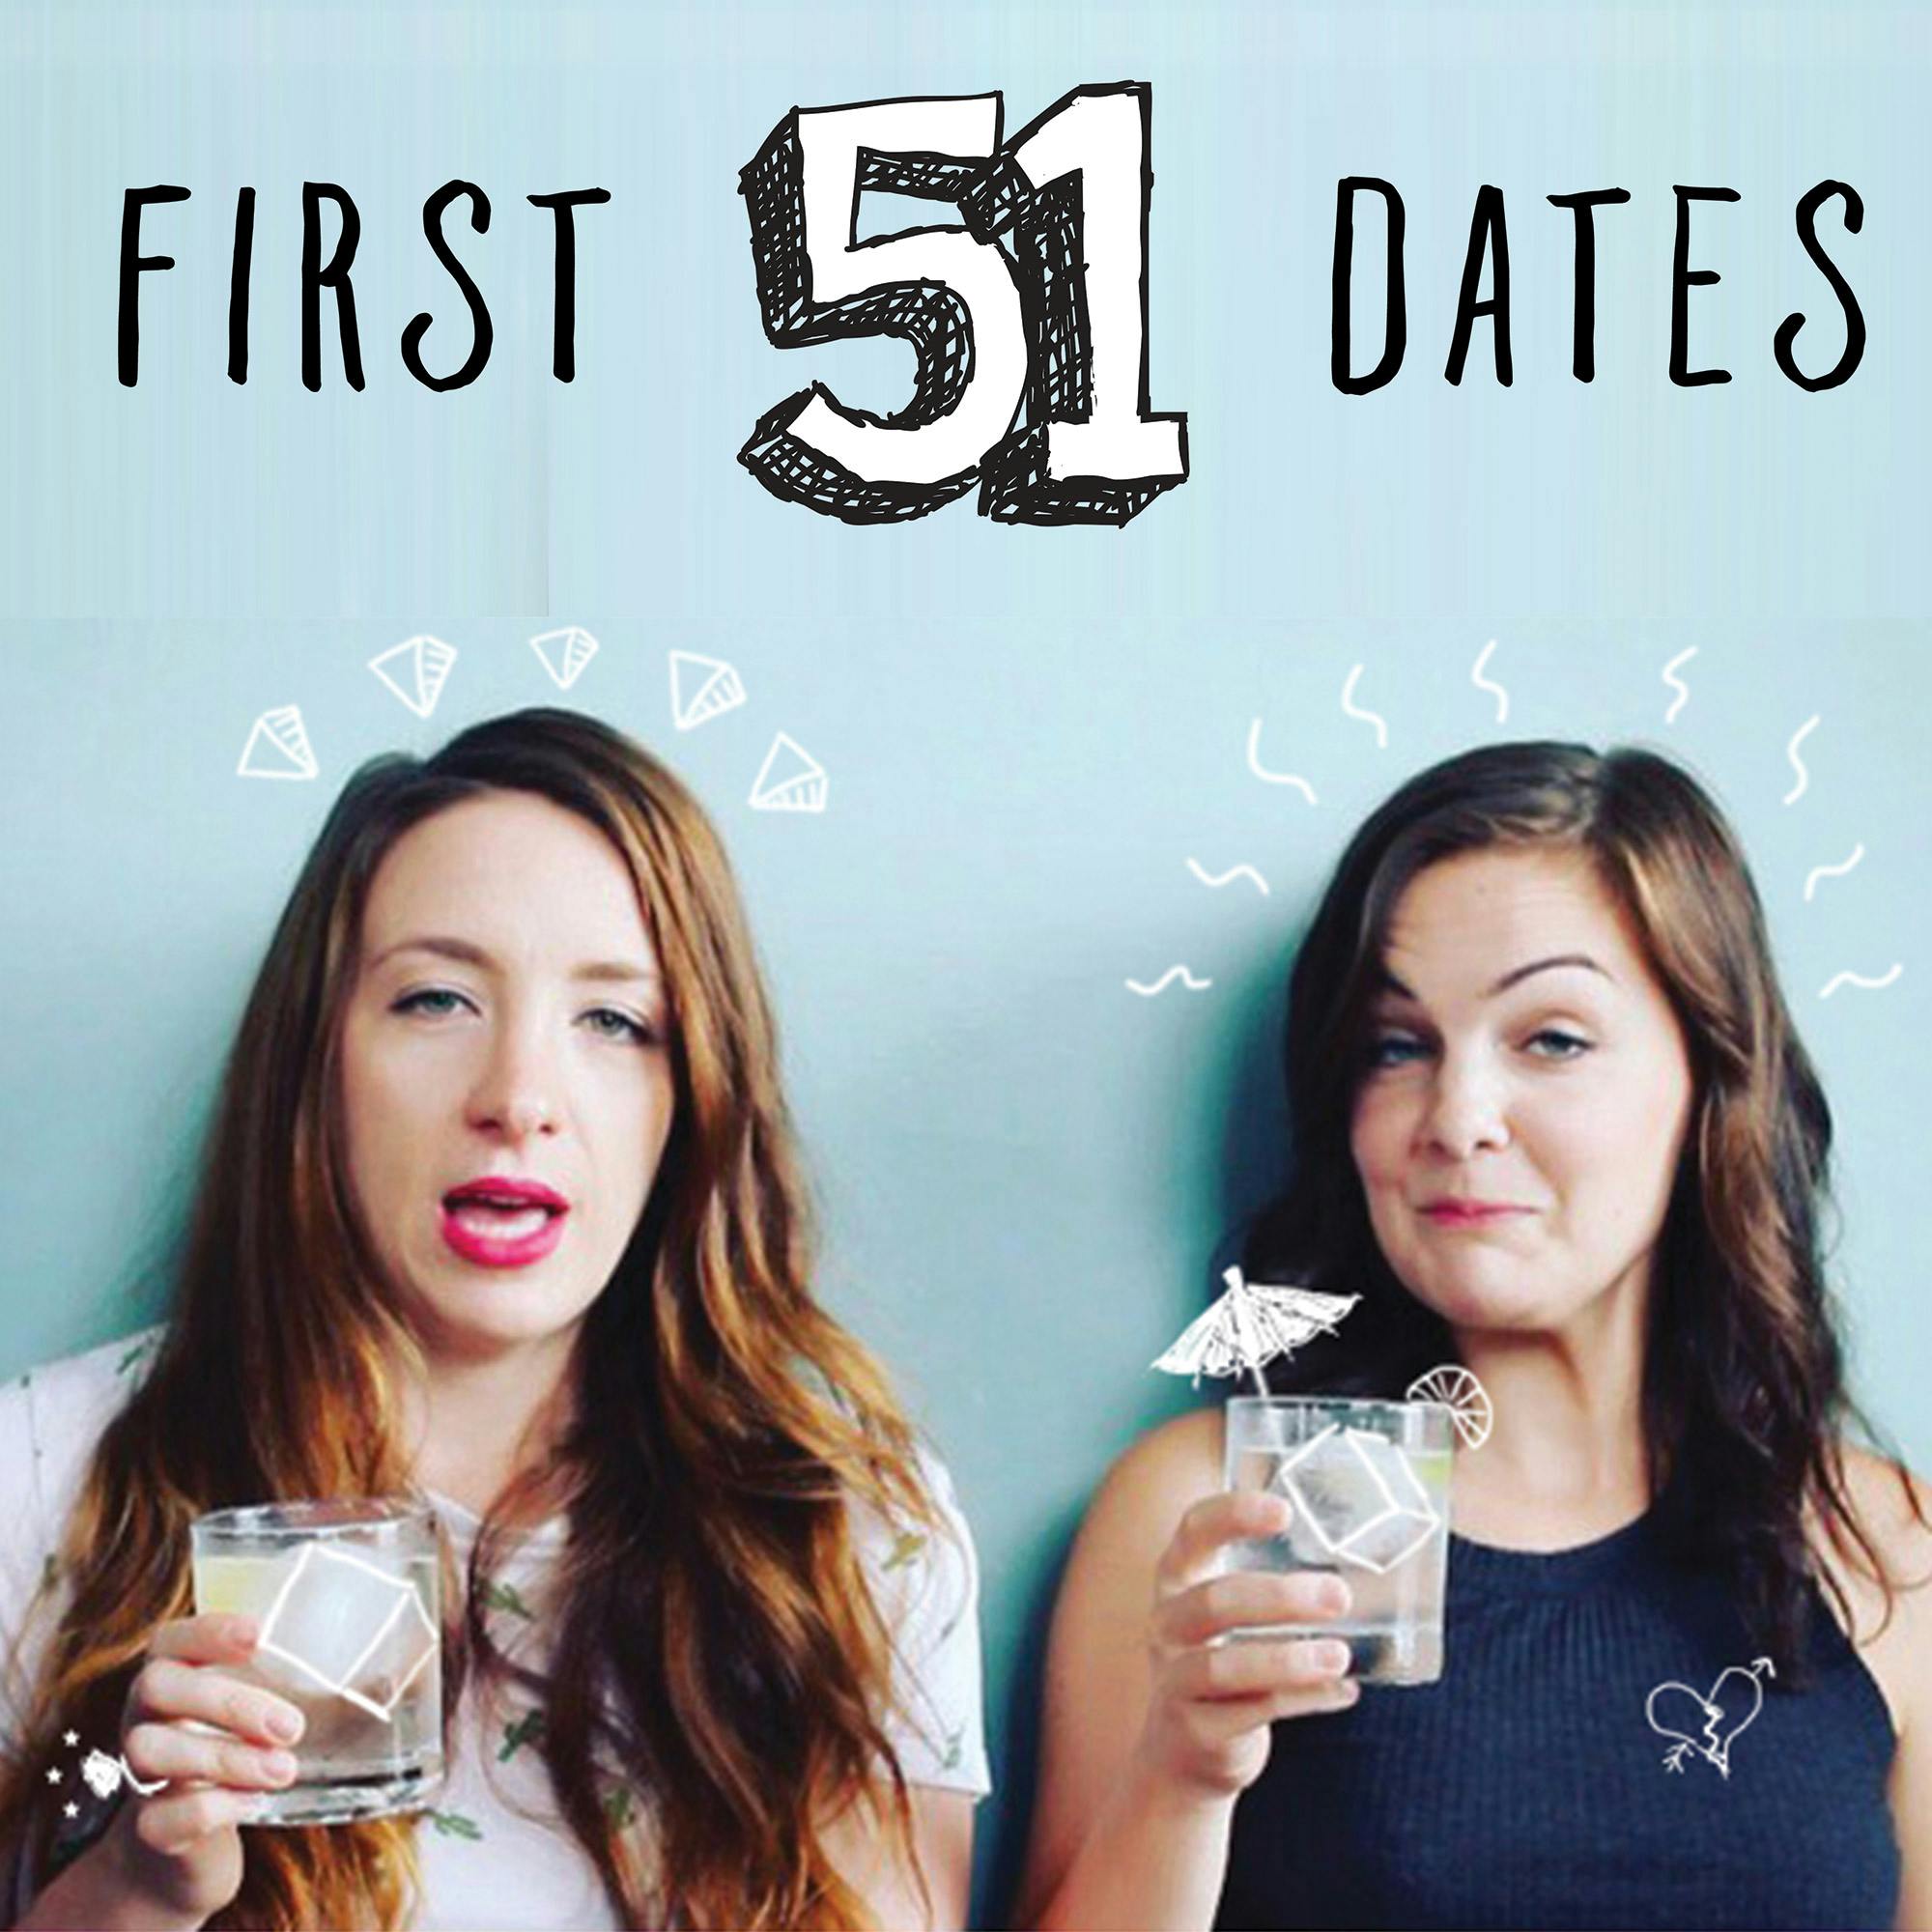 51 First Dates podcast show image